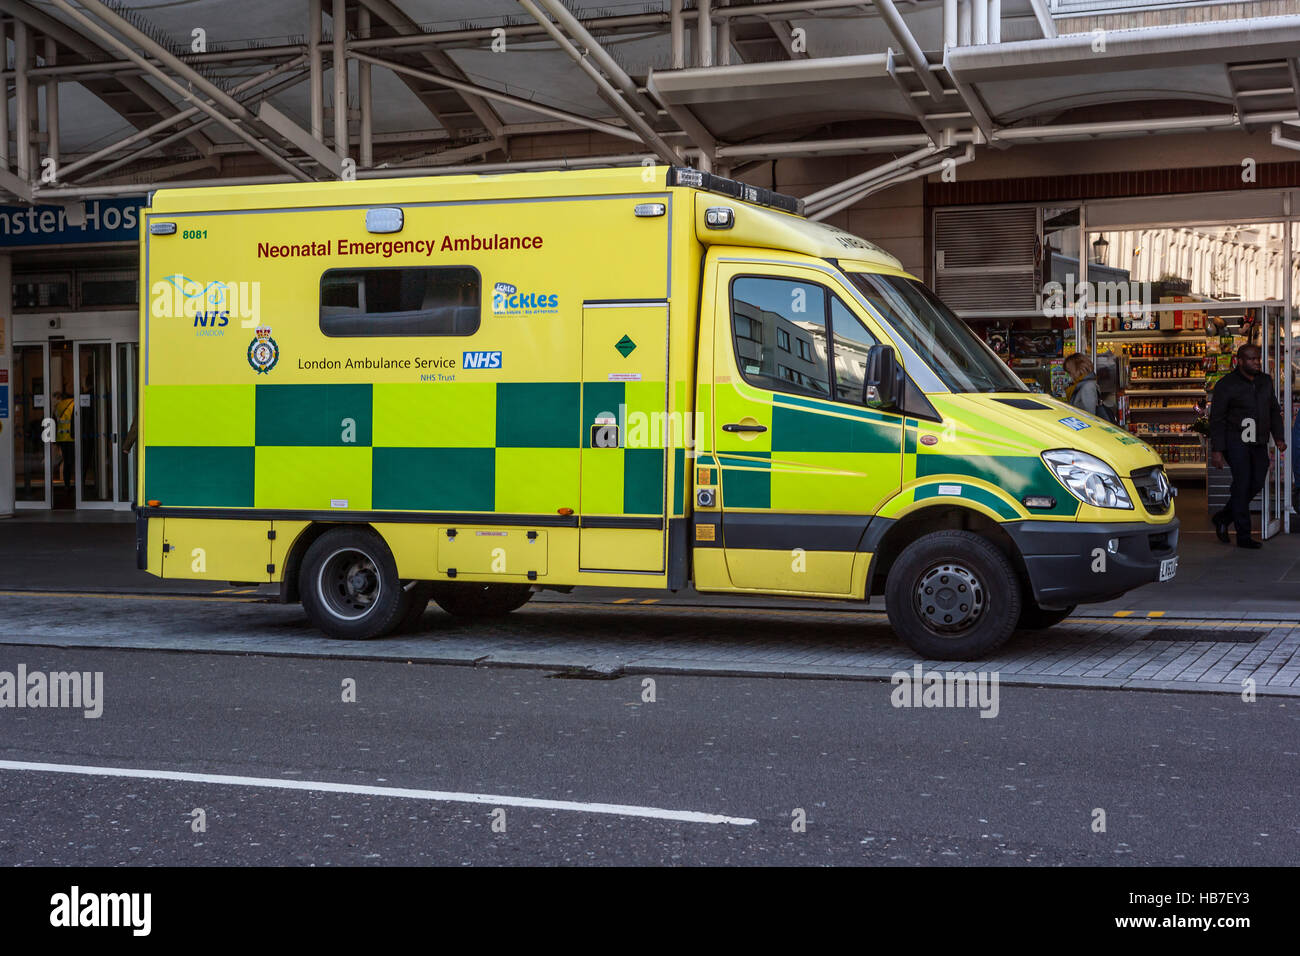 Neonatal Emergency Ambulance at Chelsea and Westminster Hospital, London Stock Photo